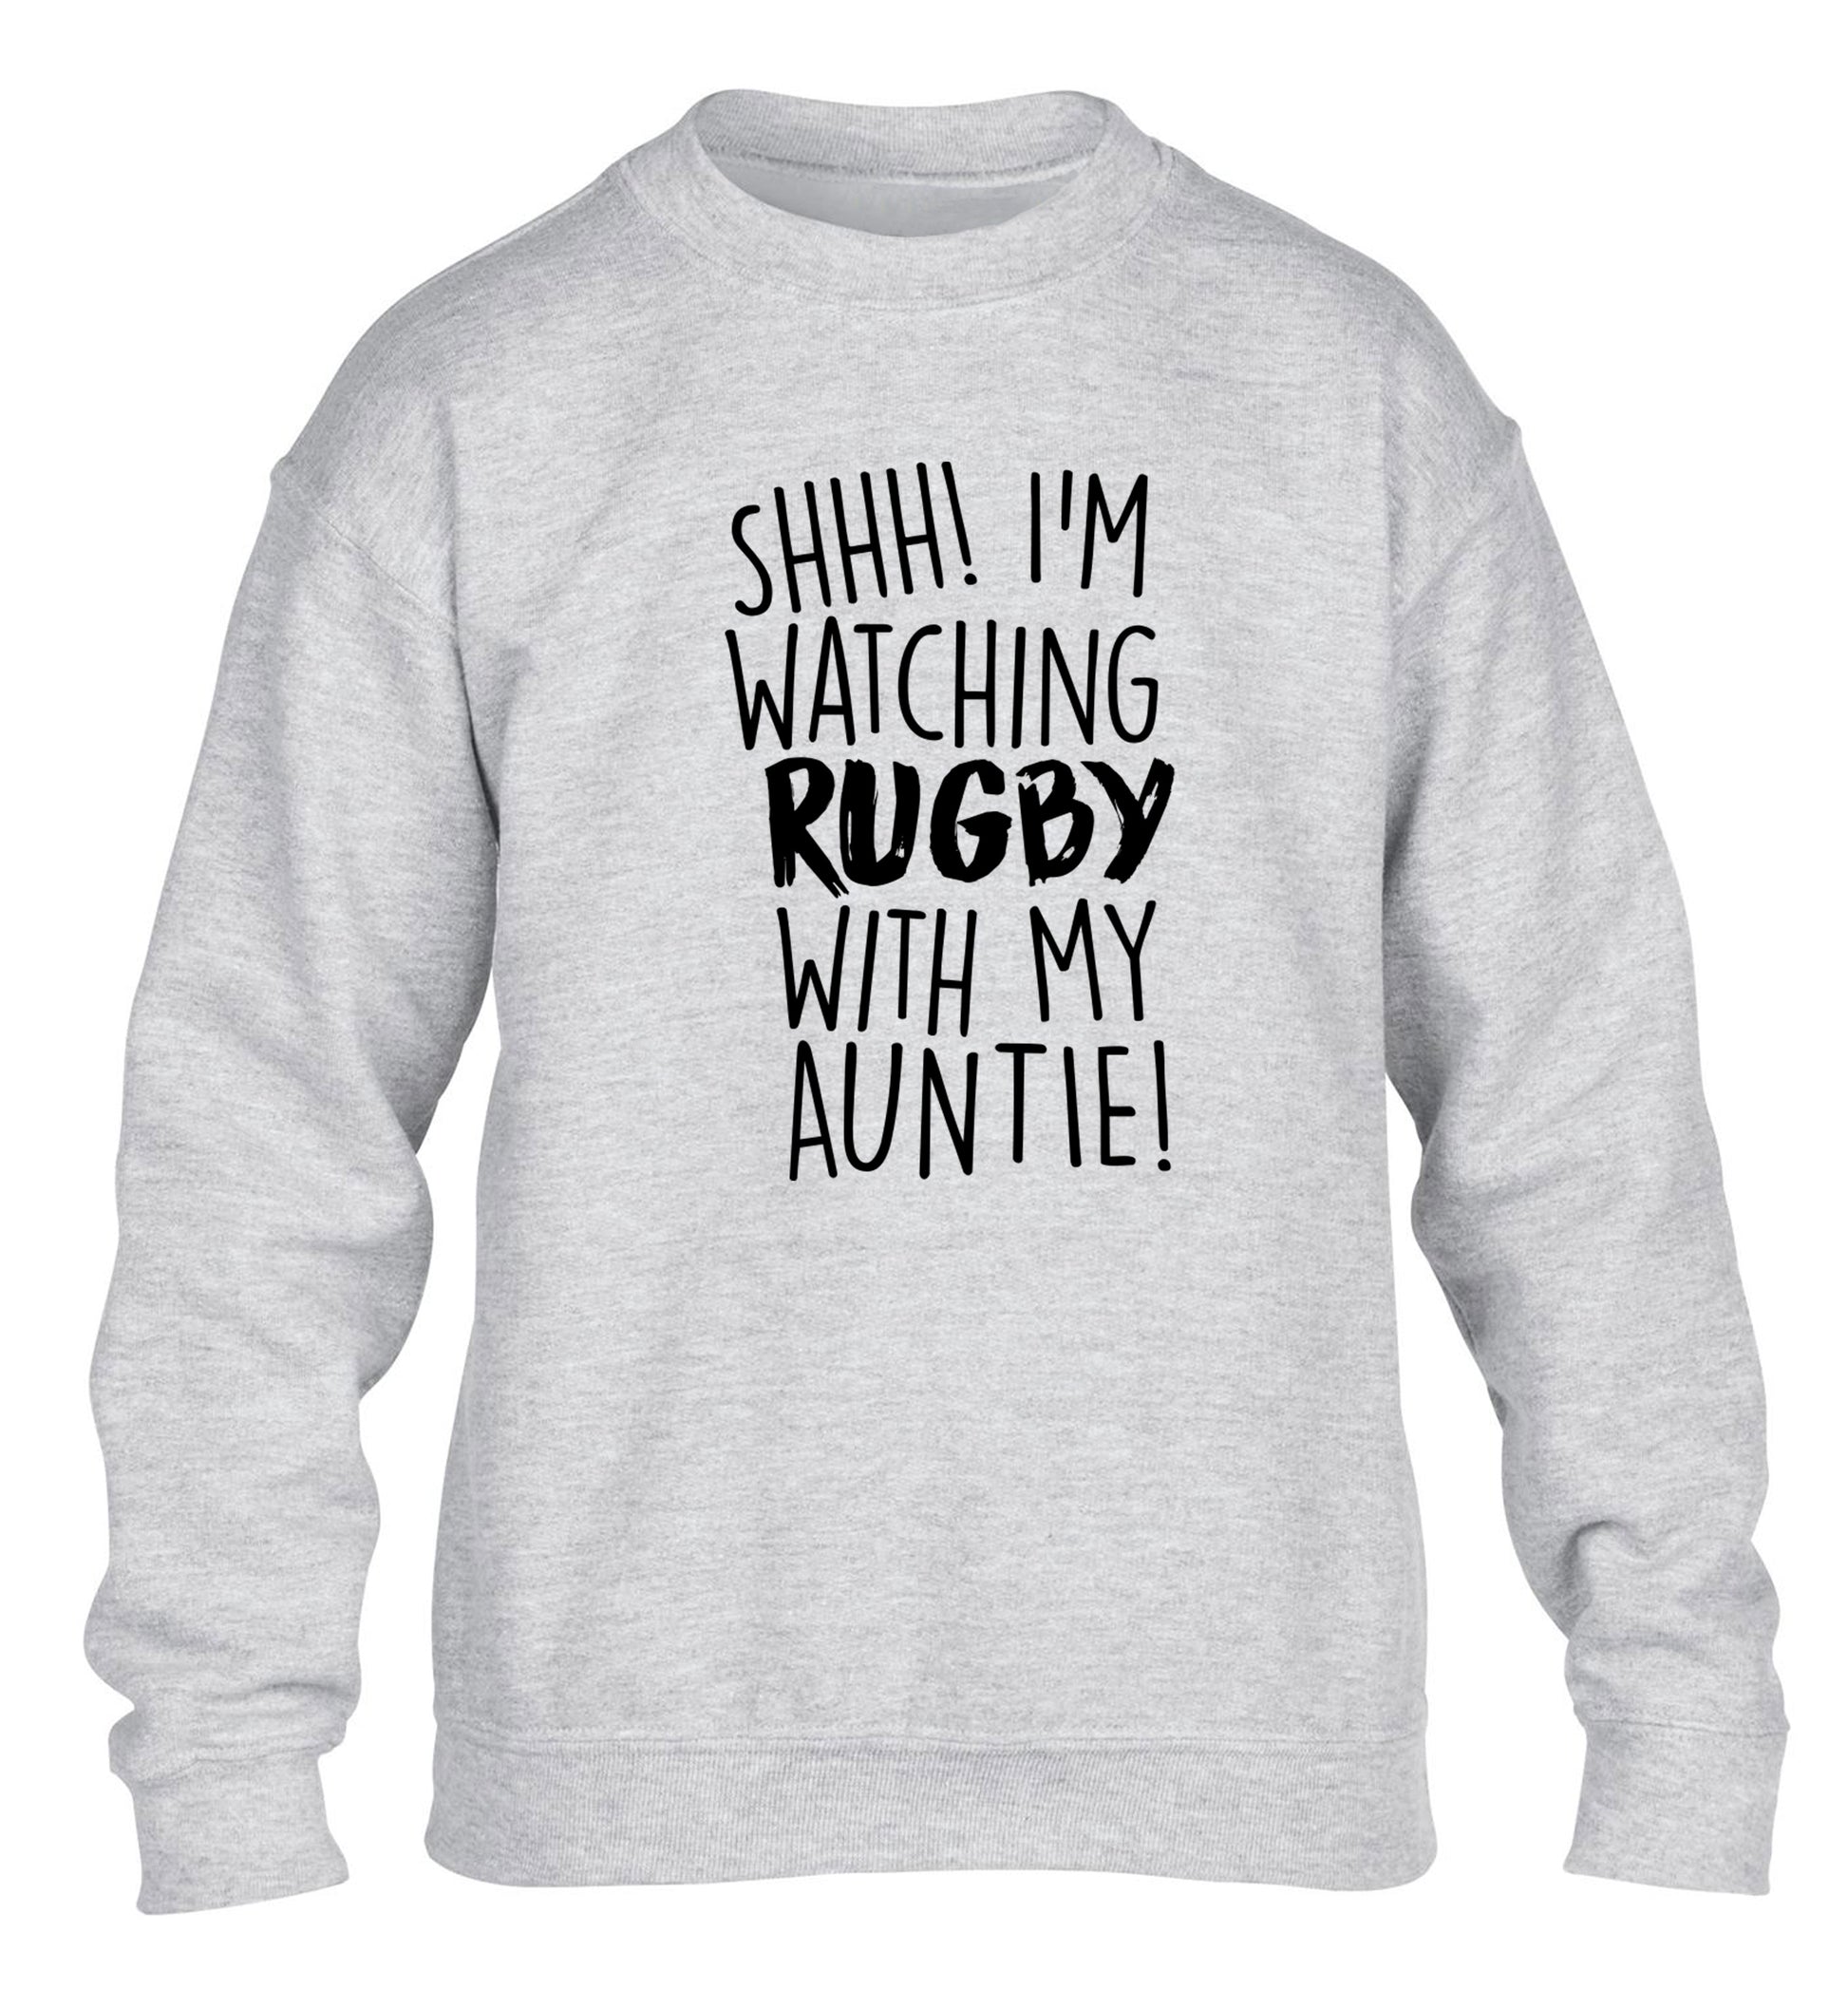 Shhh I'm watchin rugby with my auntie children's grey sweater 12-13 Years